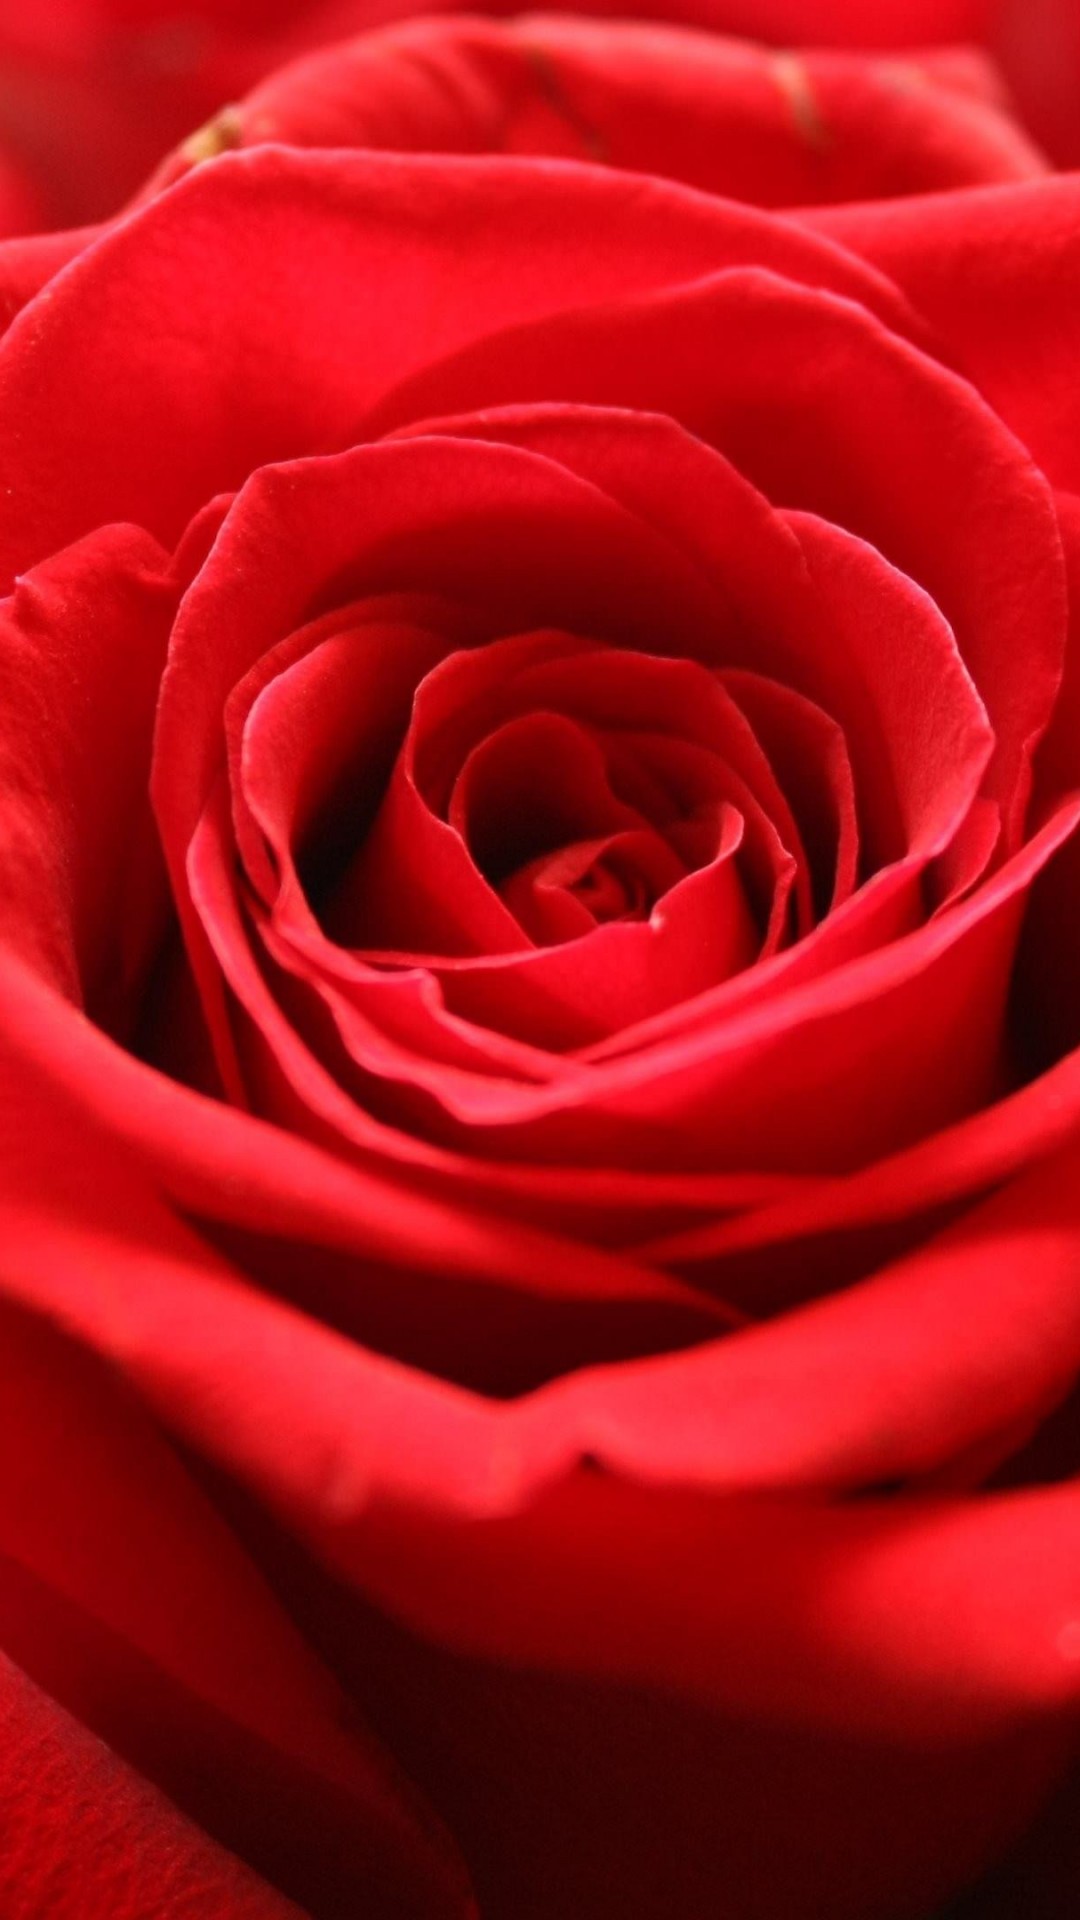 Red Rose Wallpaper for SAMSUNG Galaxy S4